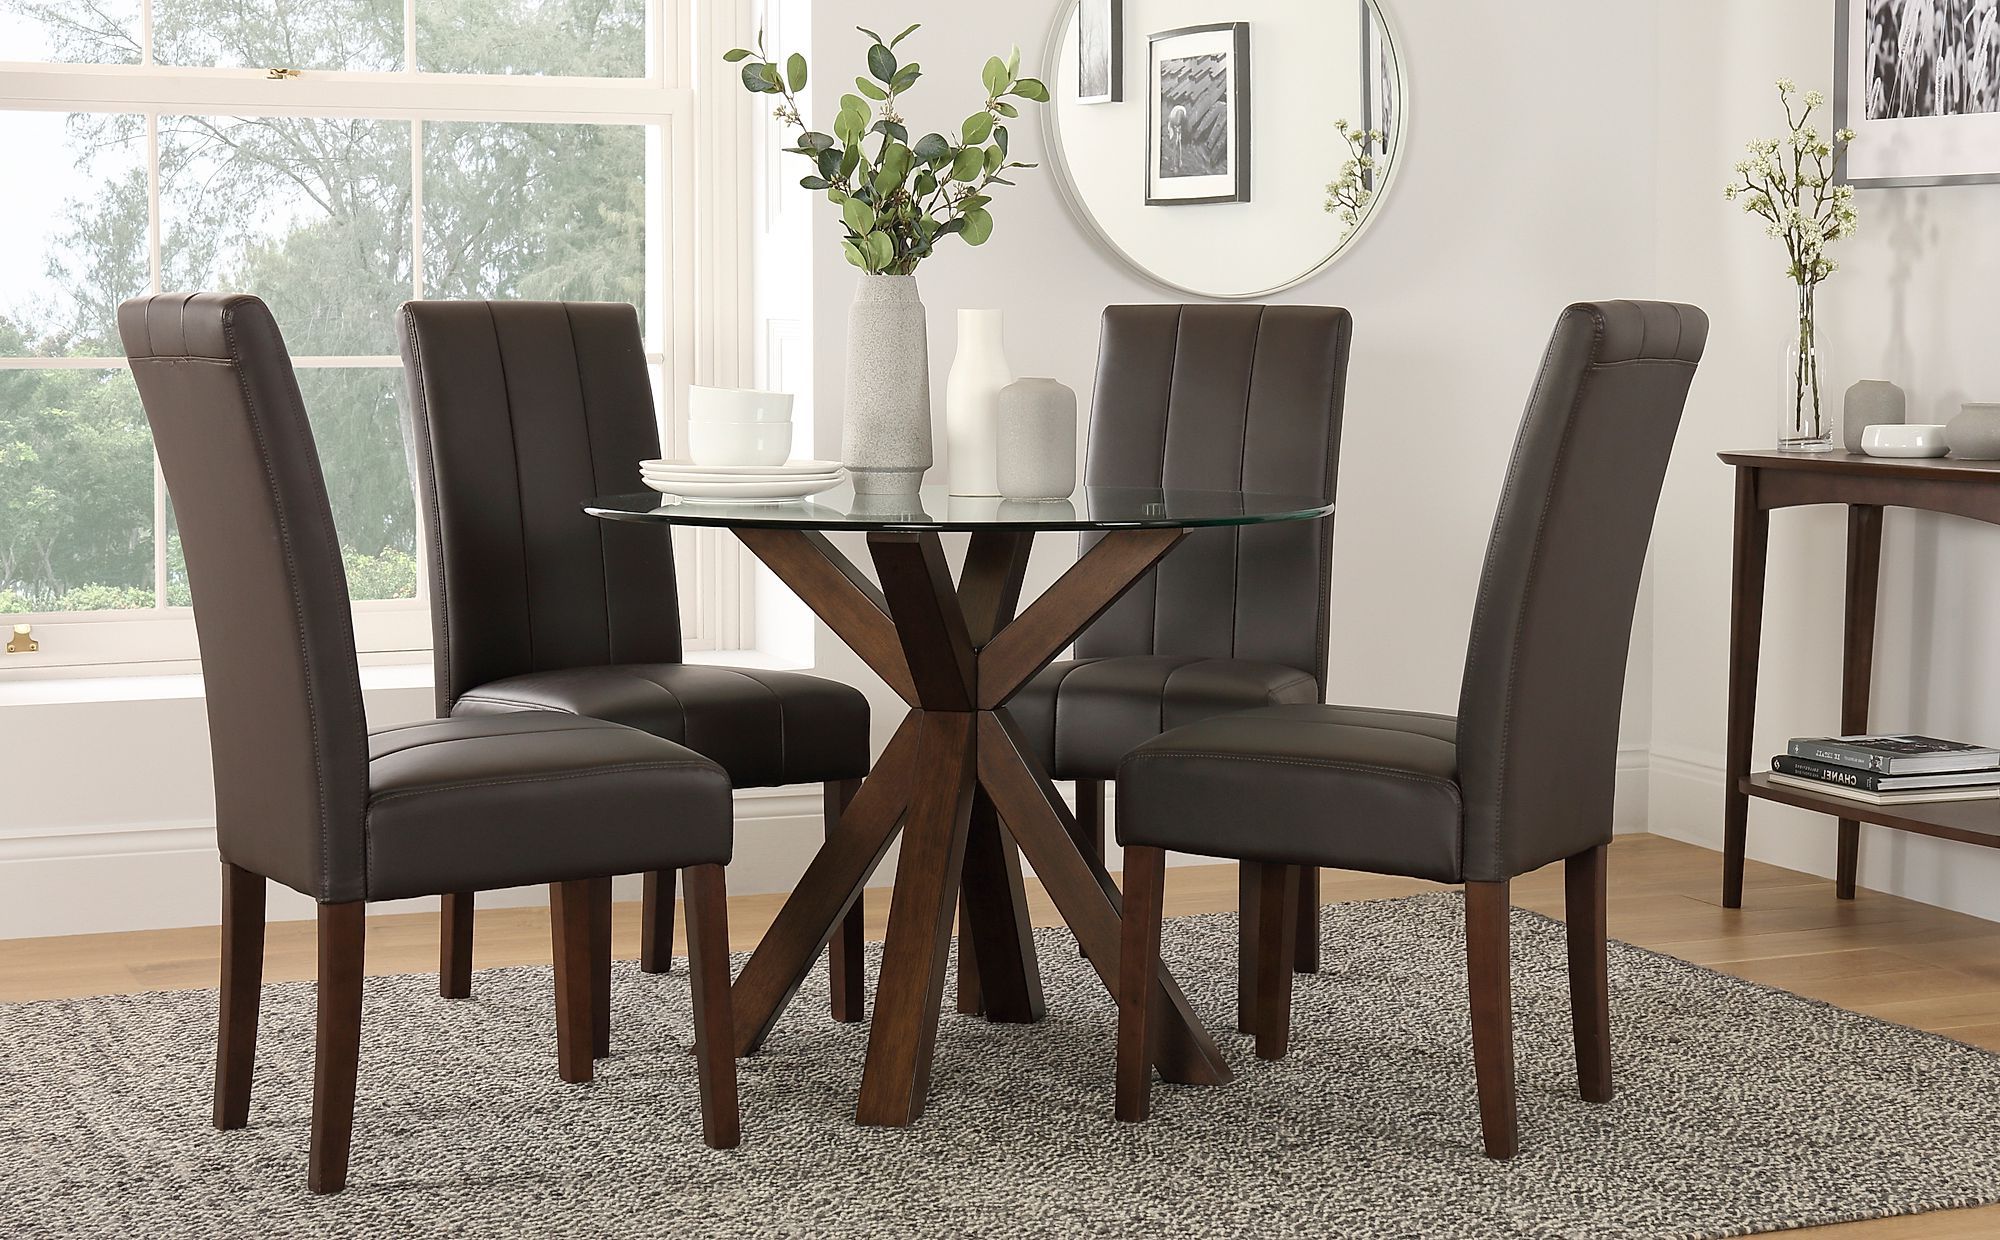 Latest Hatton Round Dark Wood And Glass Dining Table With 4 For Dark Brown Round Dining Tables (View 7 of 15)